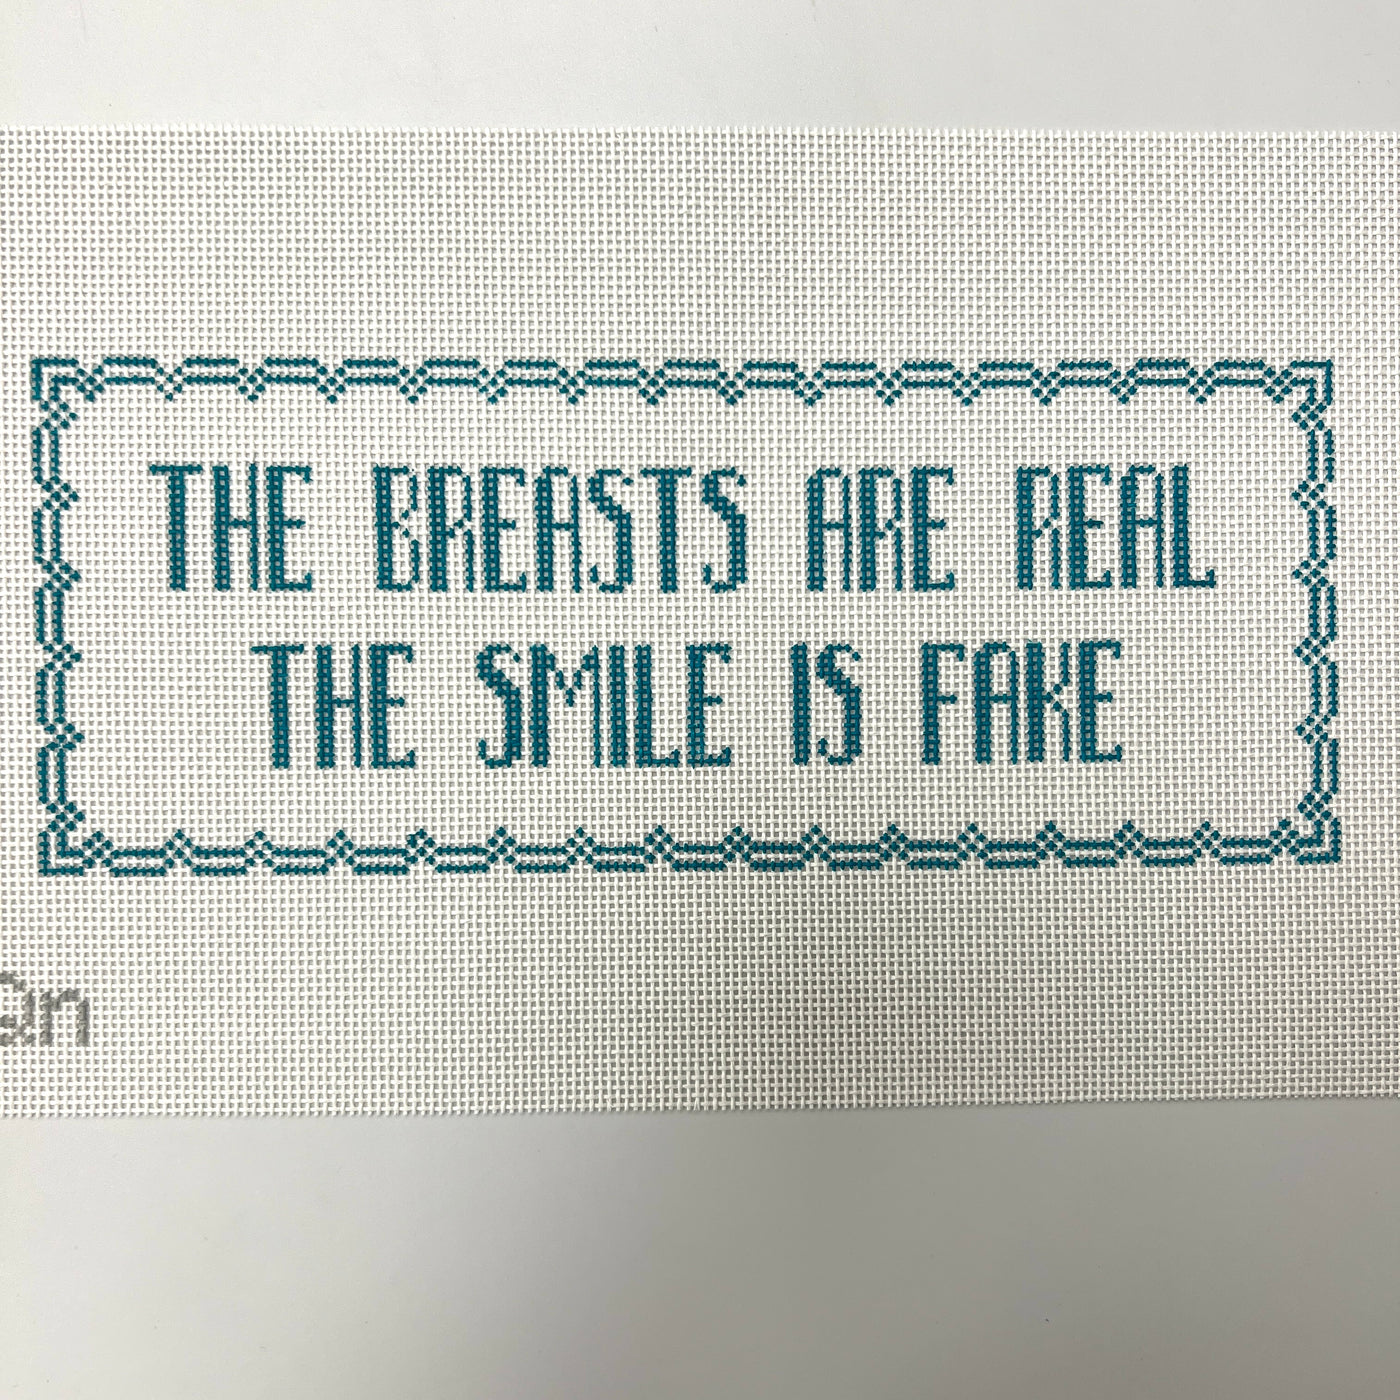 They're Real, The Smile is Fake Needlepoint Canvas